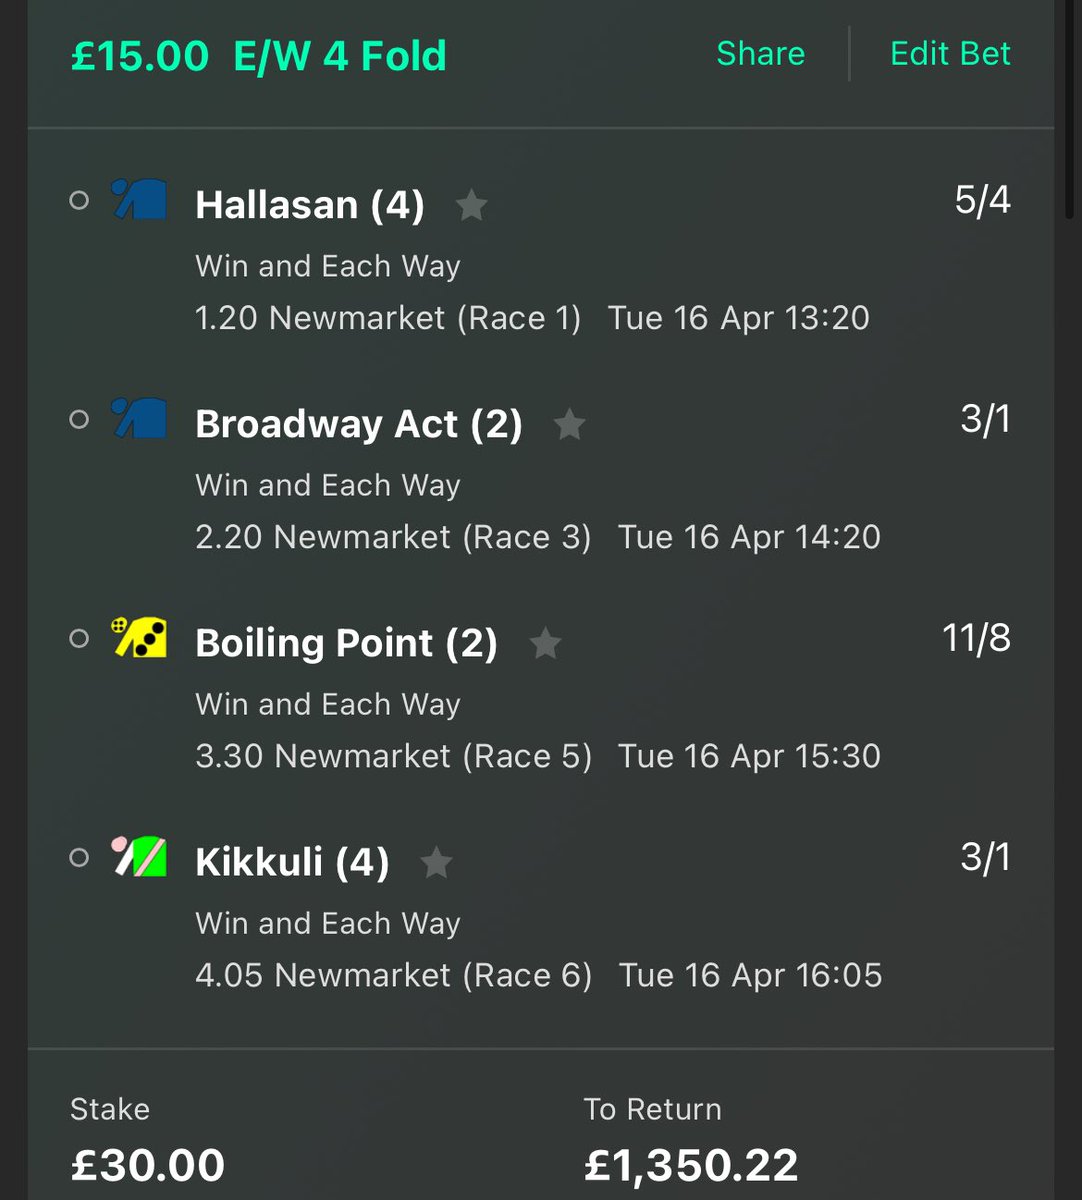 Hoping for an absolutely mega day at Newmarket, early prices were an absolute gift, heading there for tomorrows racing as well so hopefully these will pay for tomorrow 🤣🤞🏻
#HorseRacing